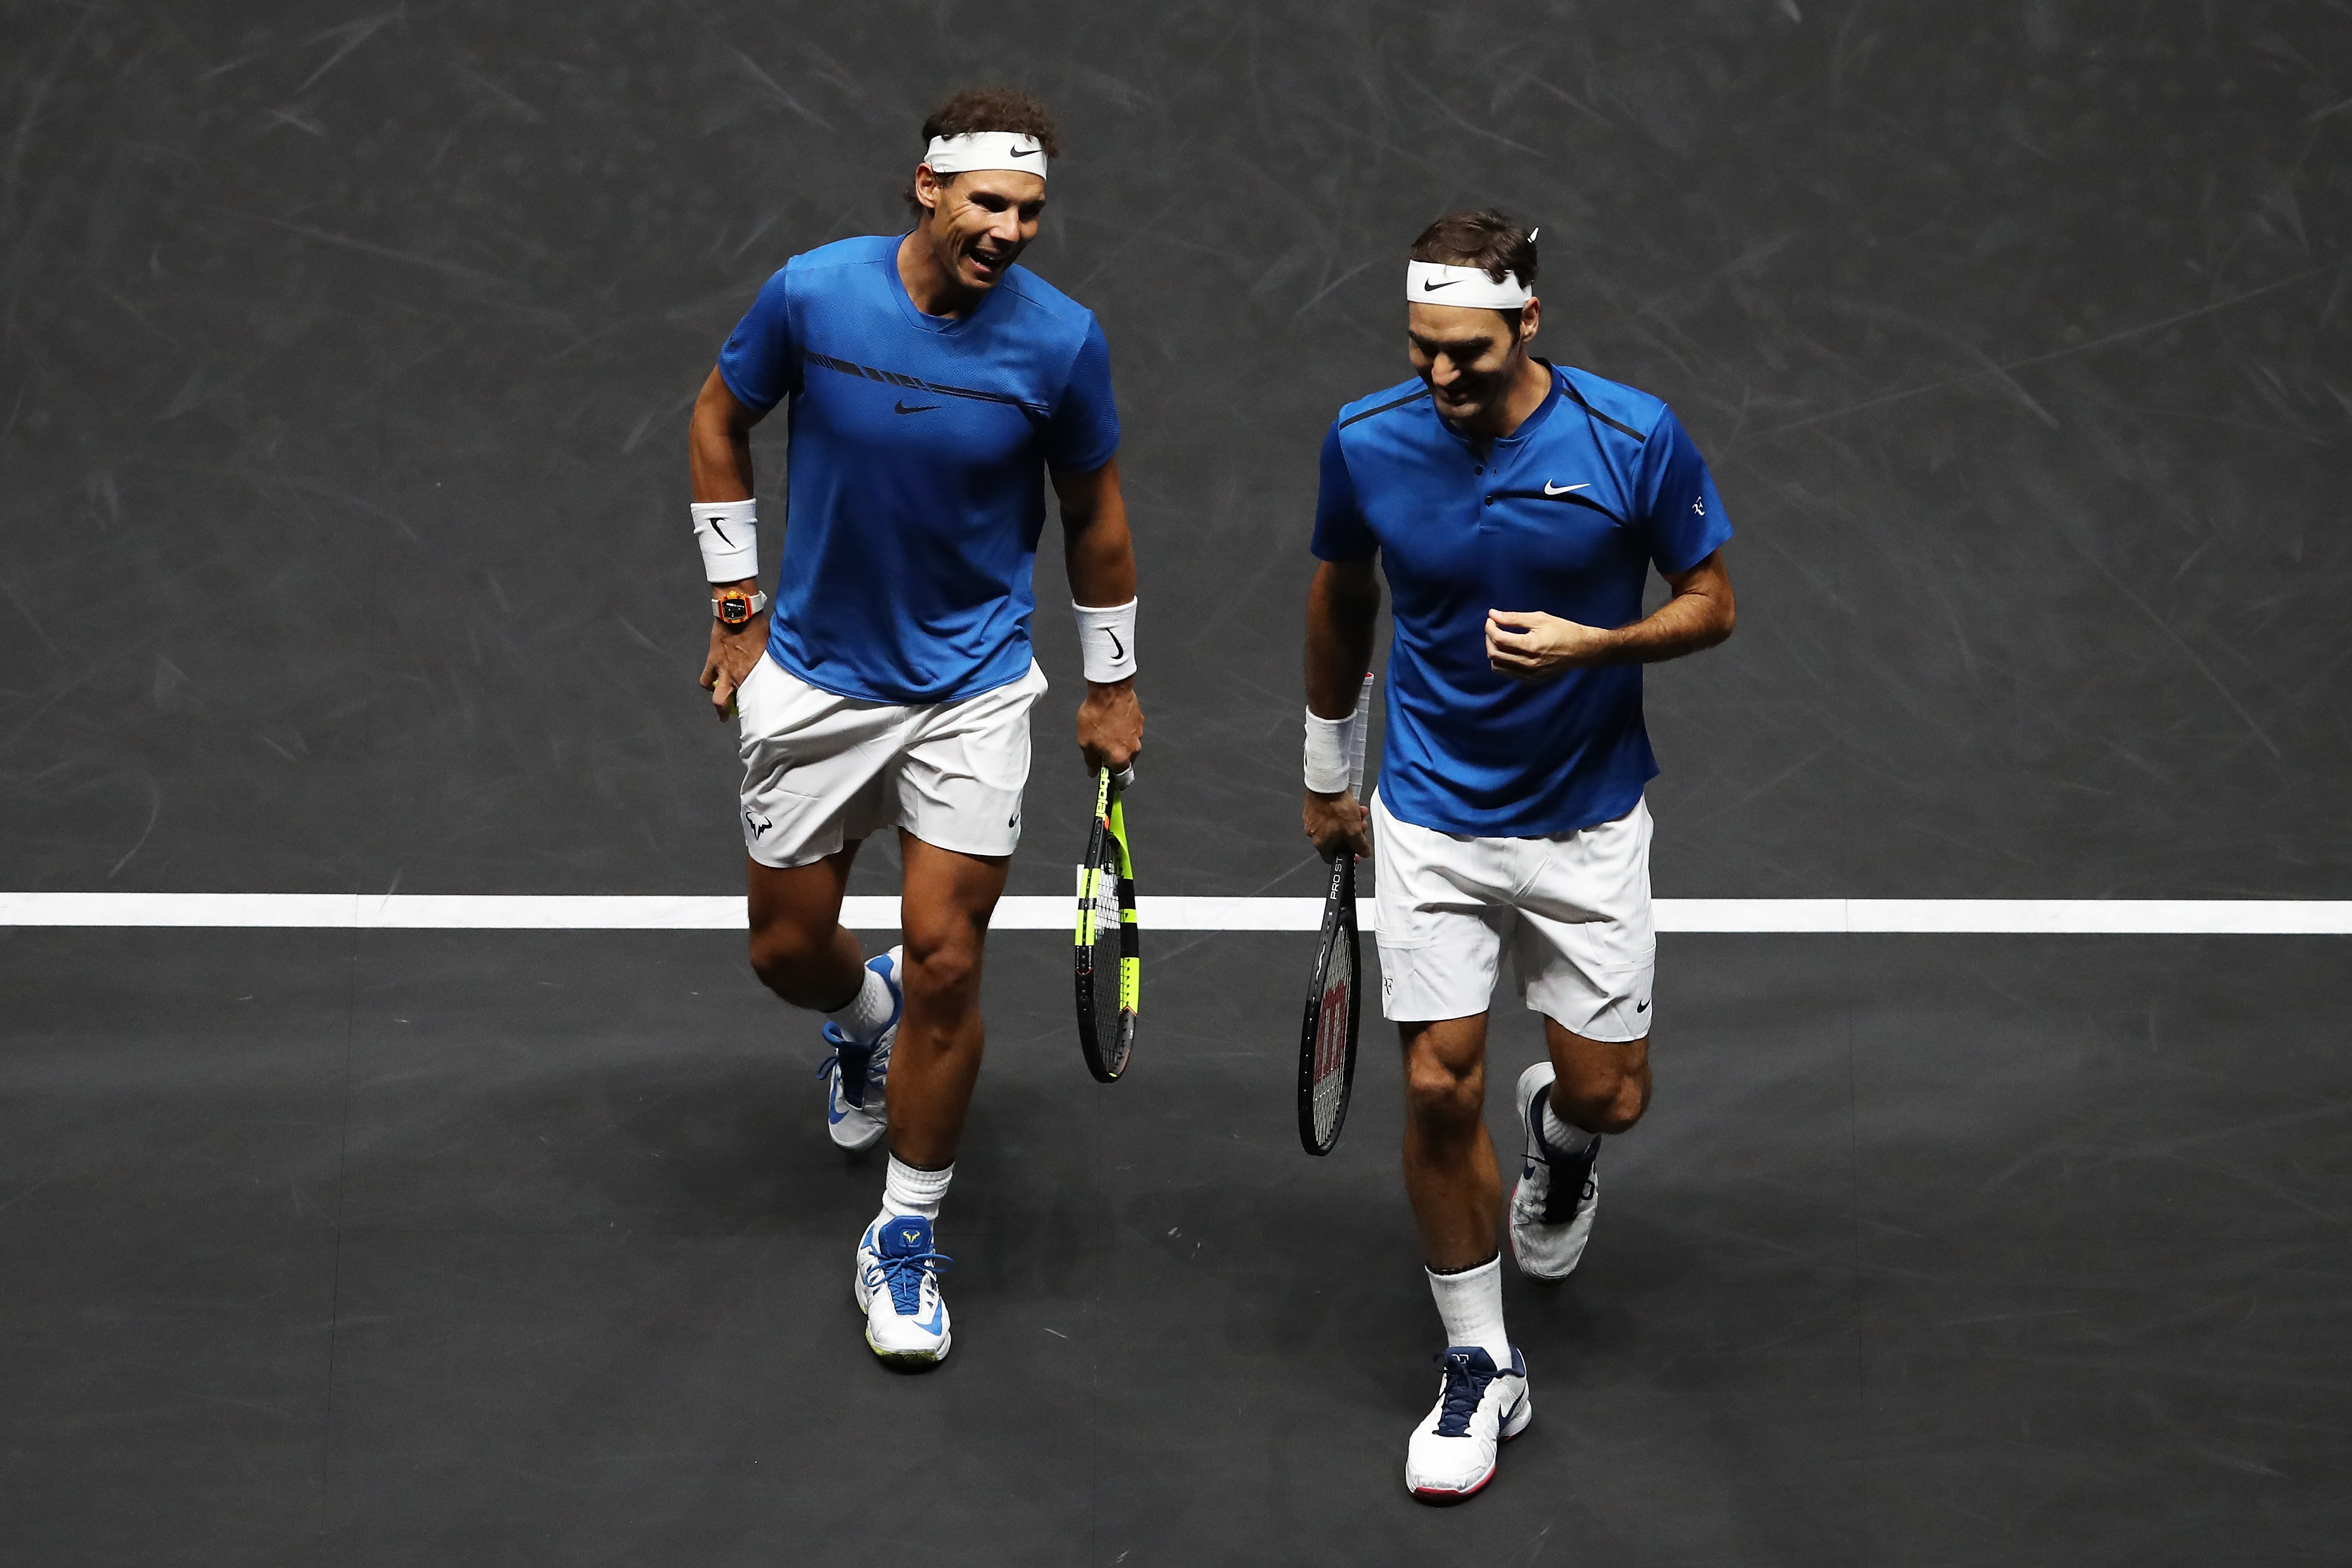 Roger Federer and Rafael Nadal of Team Europe react during there doubles match against Jack Sock and Sam Querrey of Team World on Day 2 of the Laver Cup on September 23, 2017 in Prague, Czech Republic. (Julian Finney&mdash;Getty Images for Laver Cup)